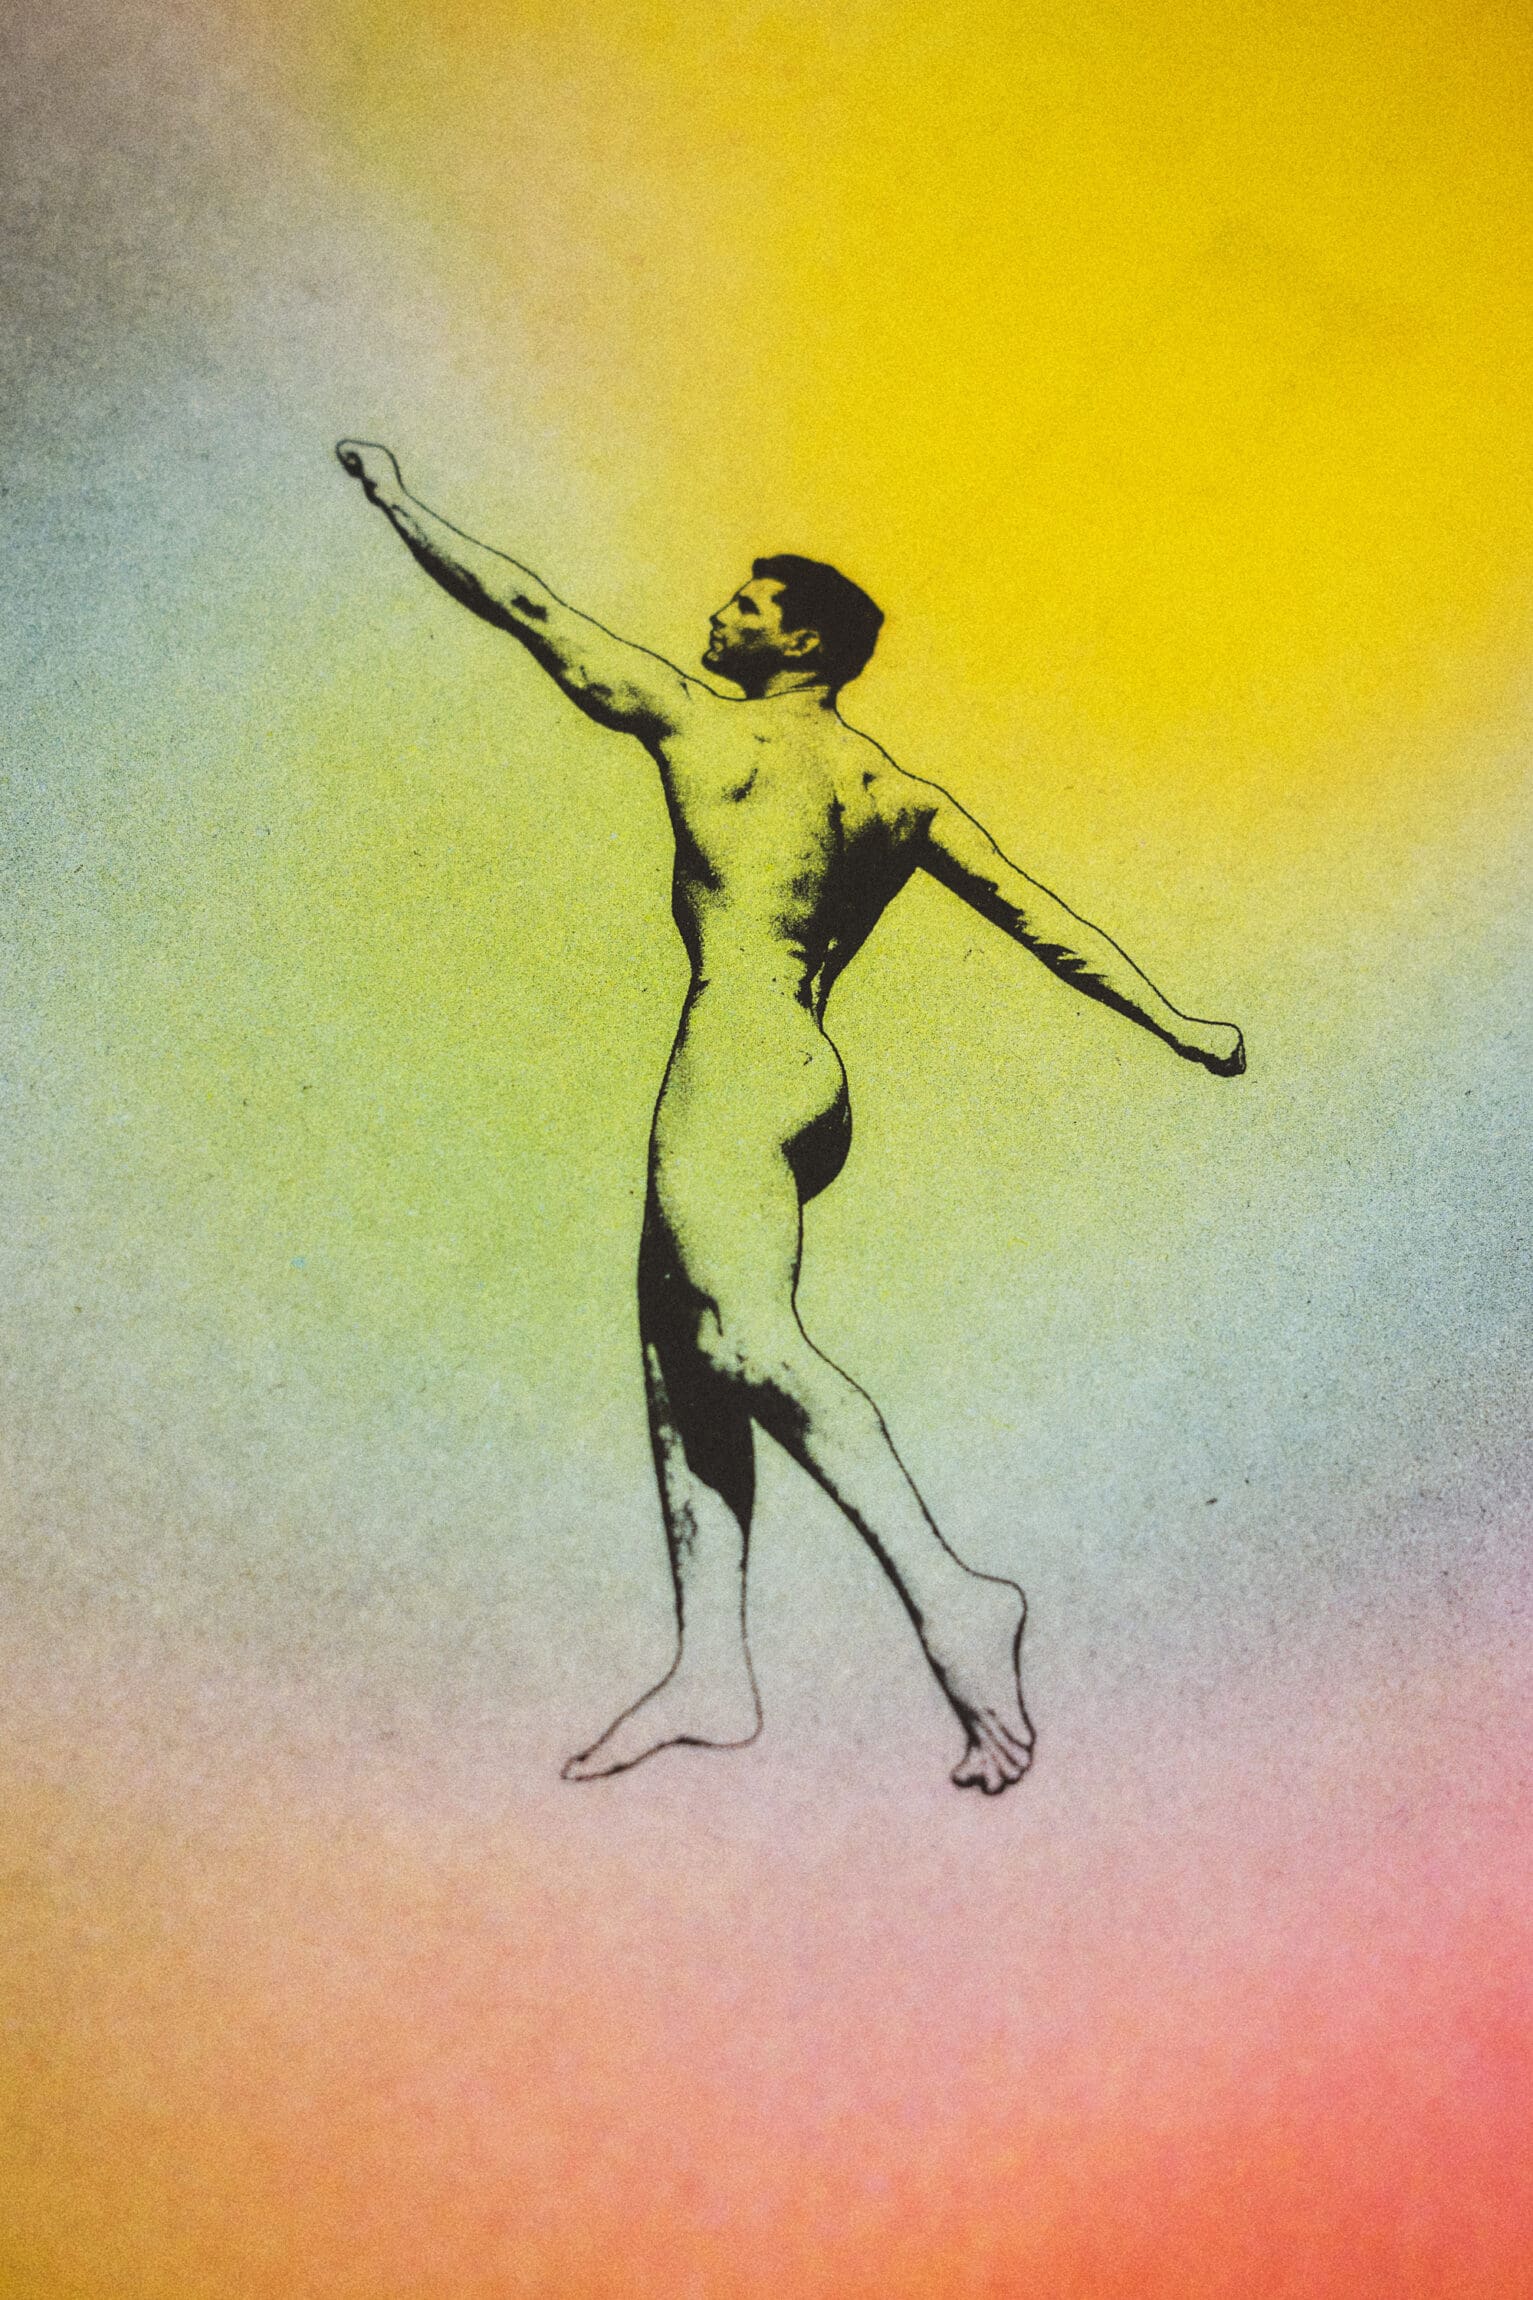 Hattie Stewart's illustration of a man reaching for the sky, against a yellow, orange and blue background